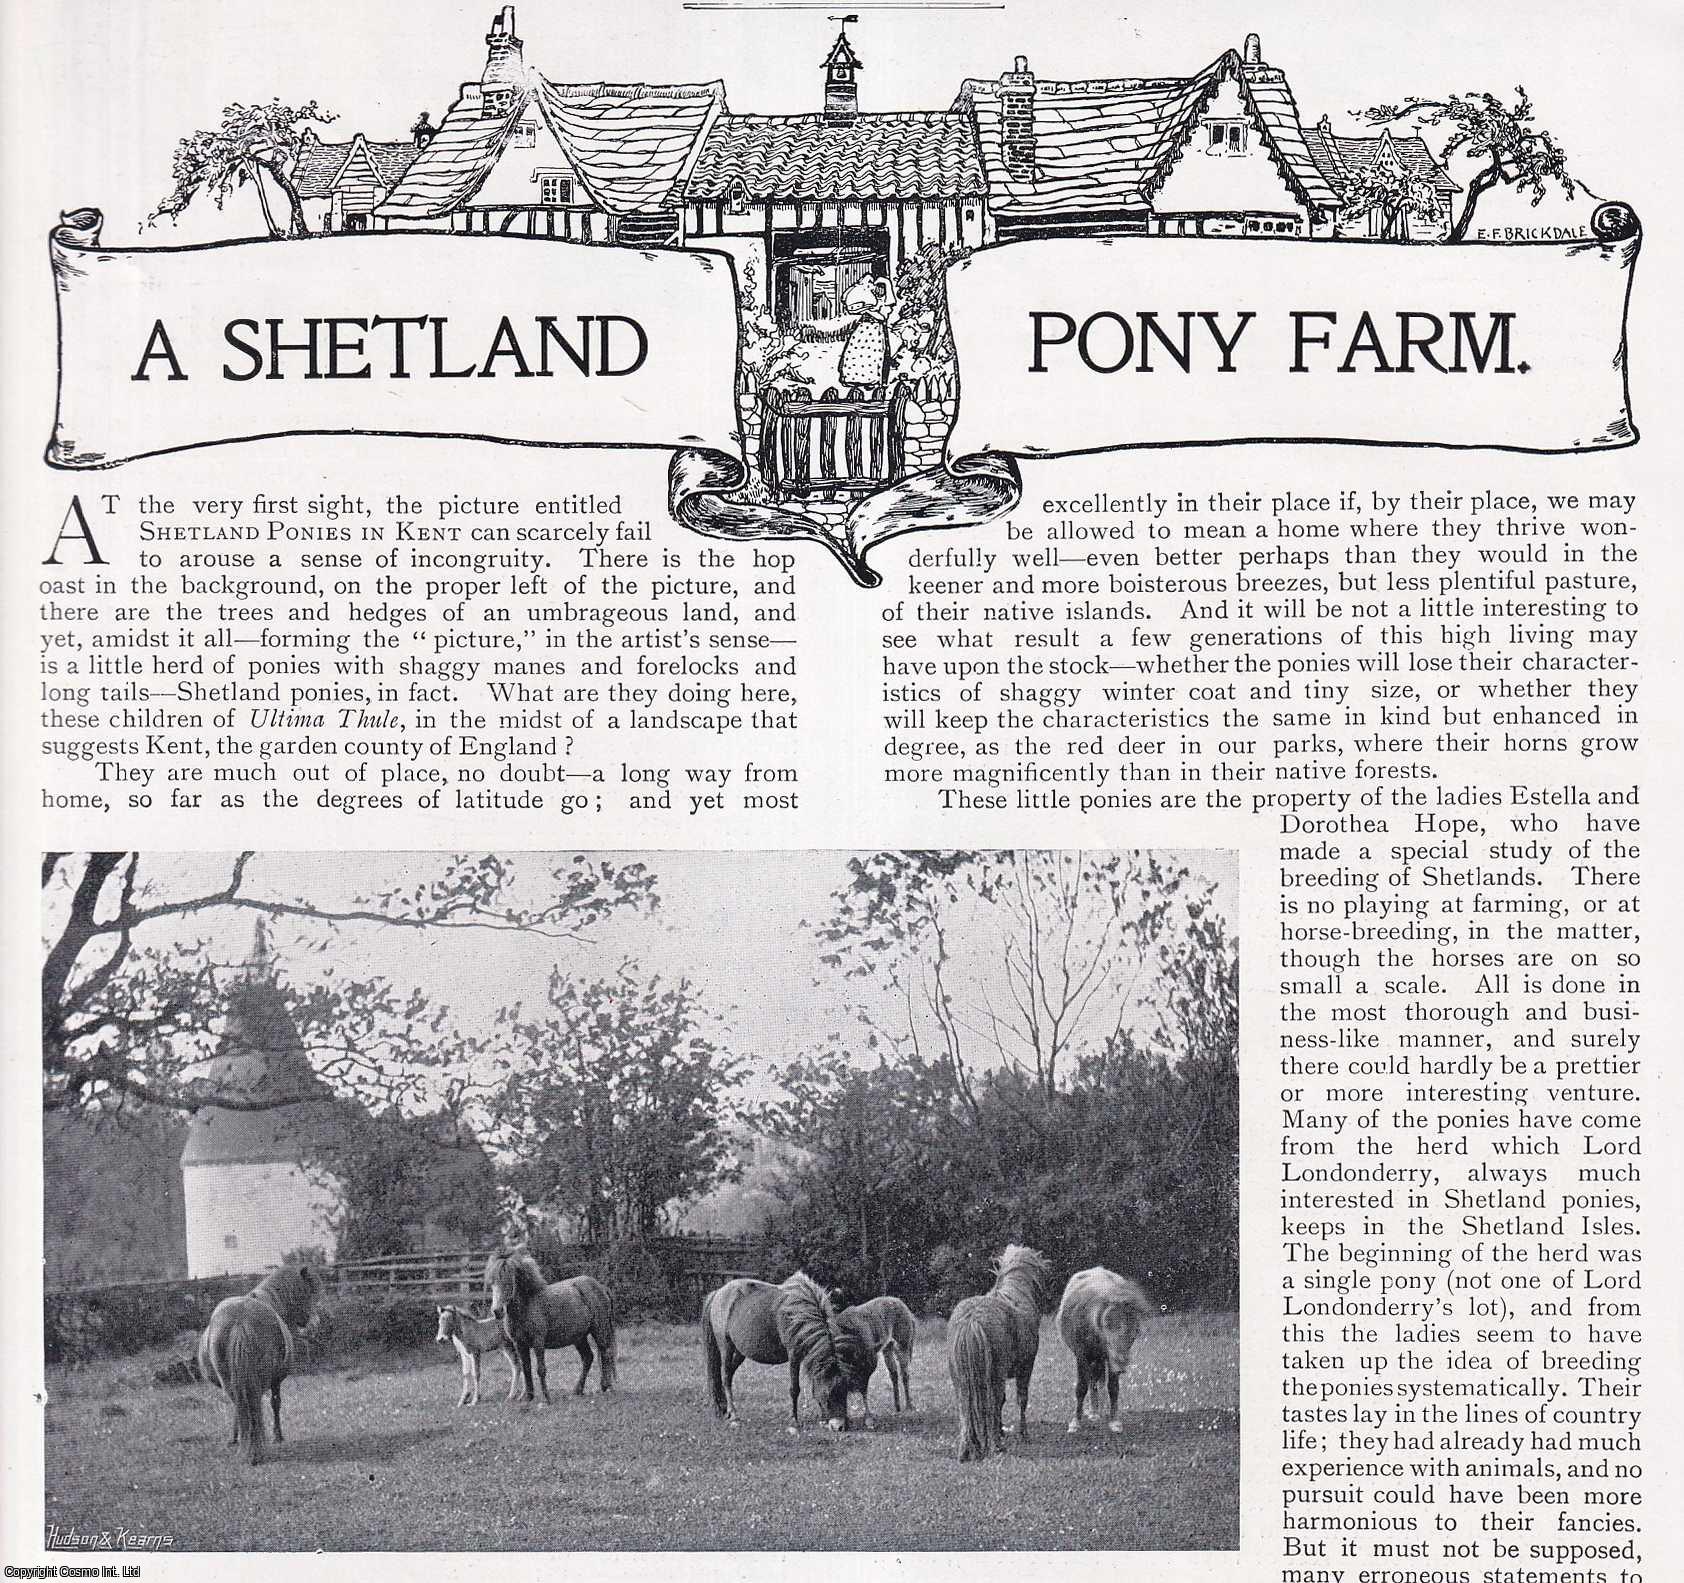 COUNTRY LIFE - A Shetland Pony Farm in Kent. Several pictures and accompanying text, removed from an original issue of Country Life Magazine, 1898.